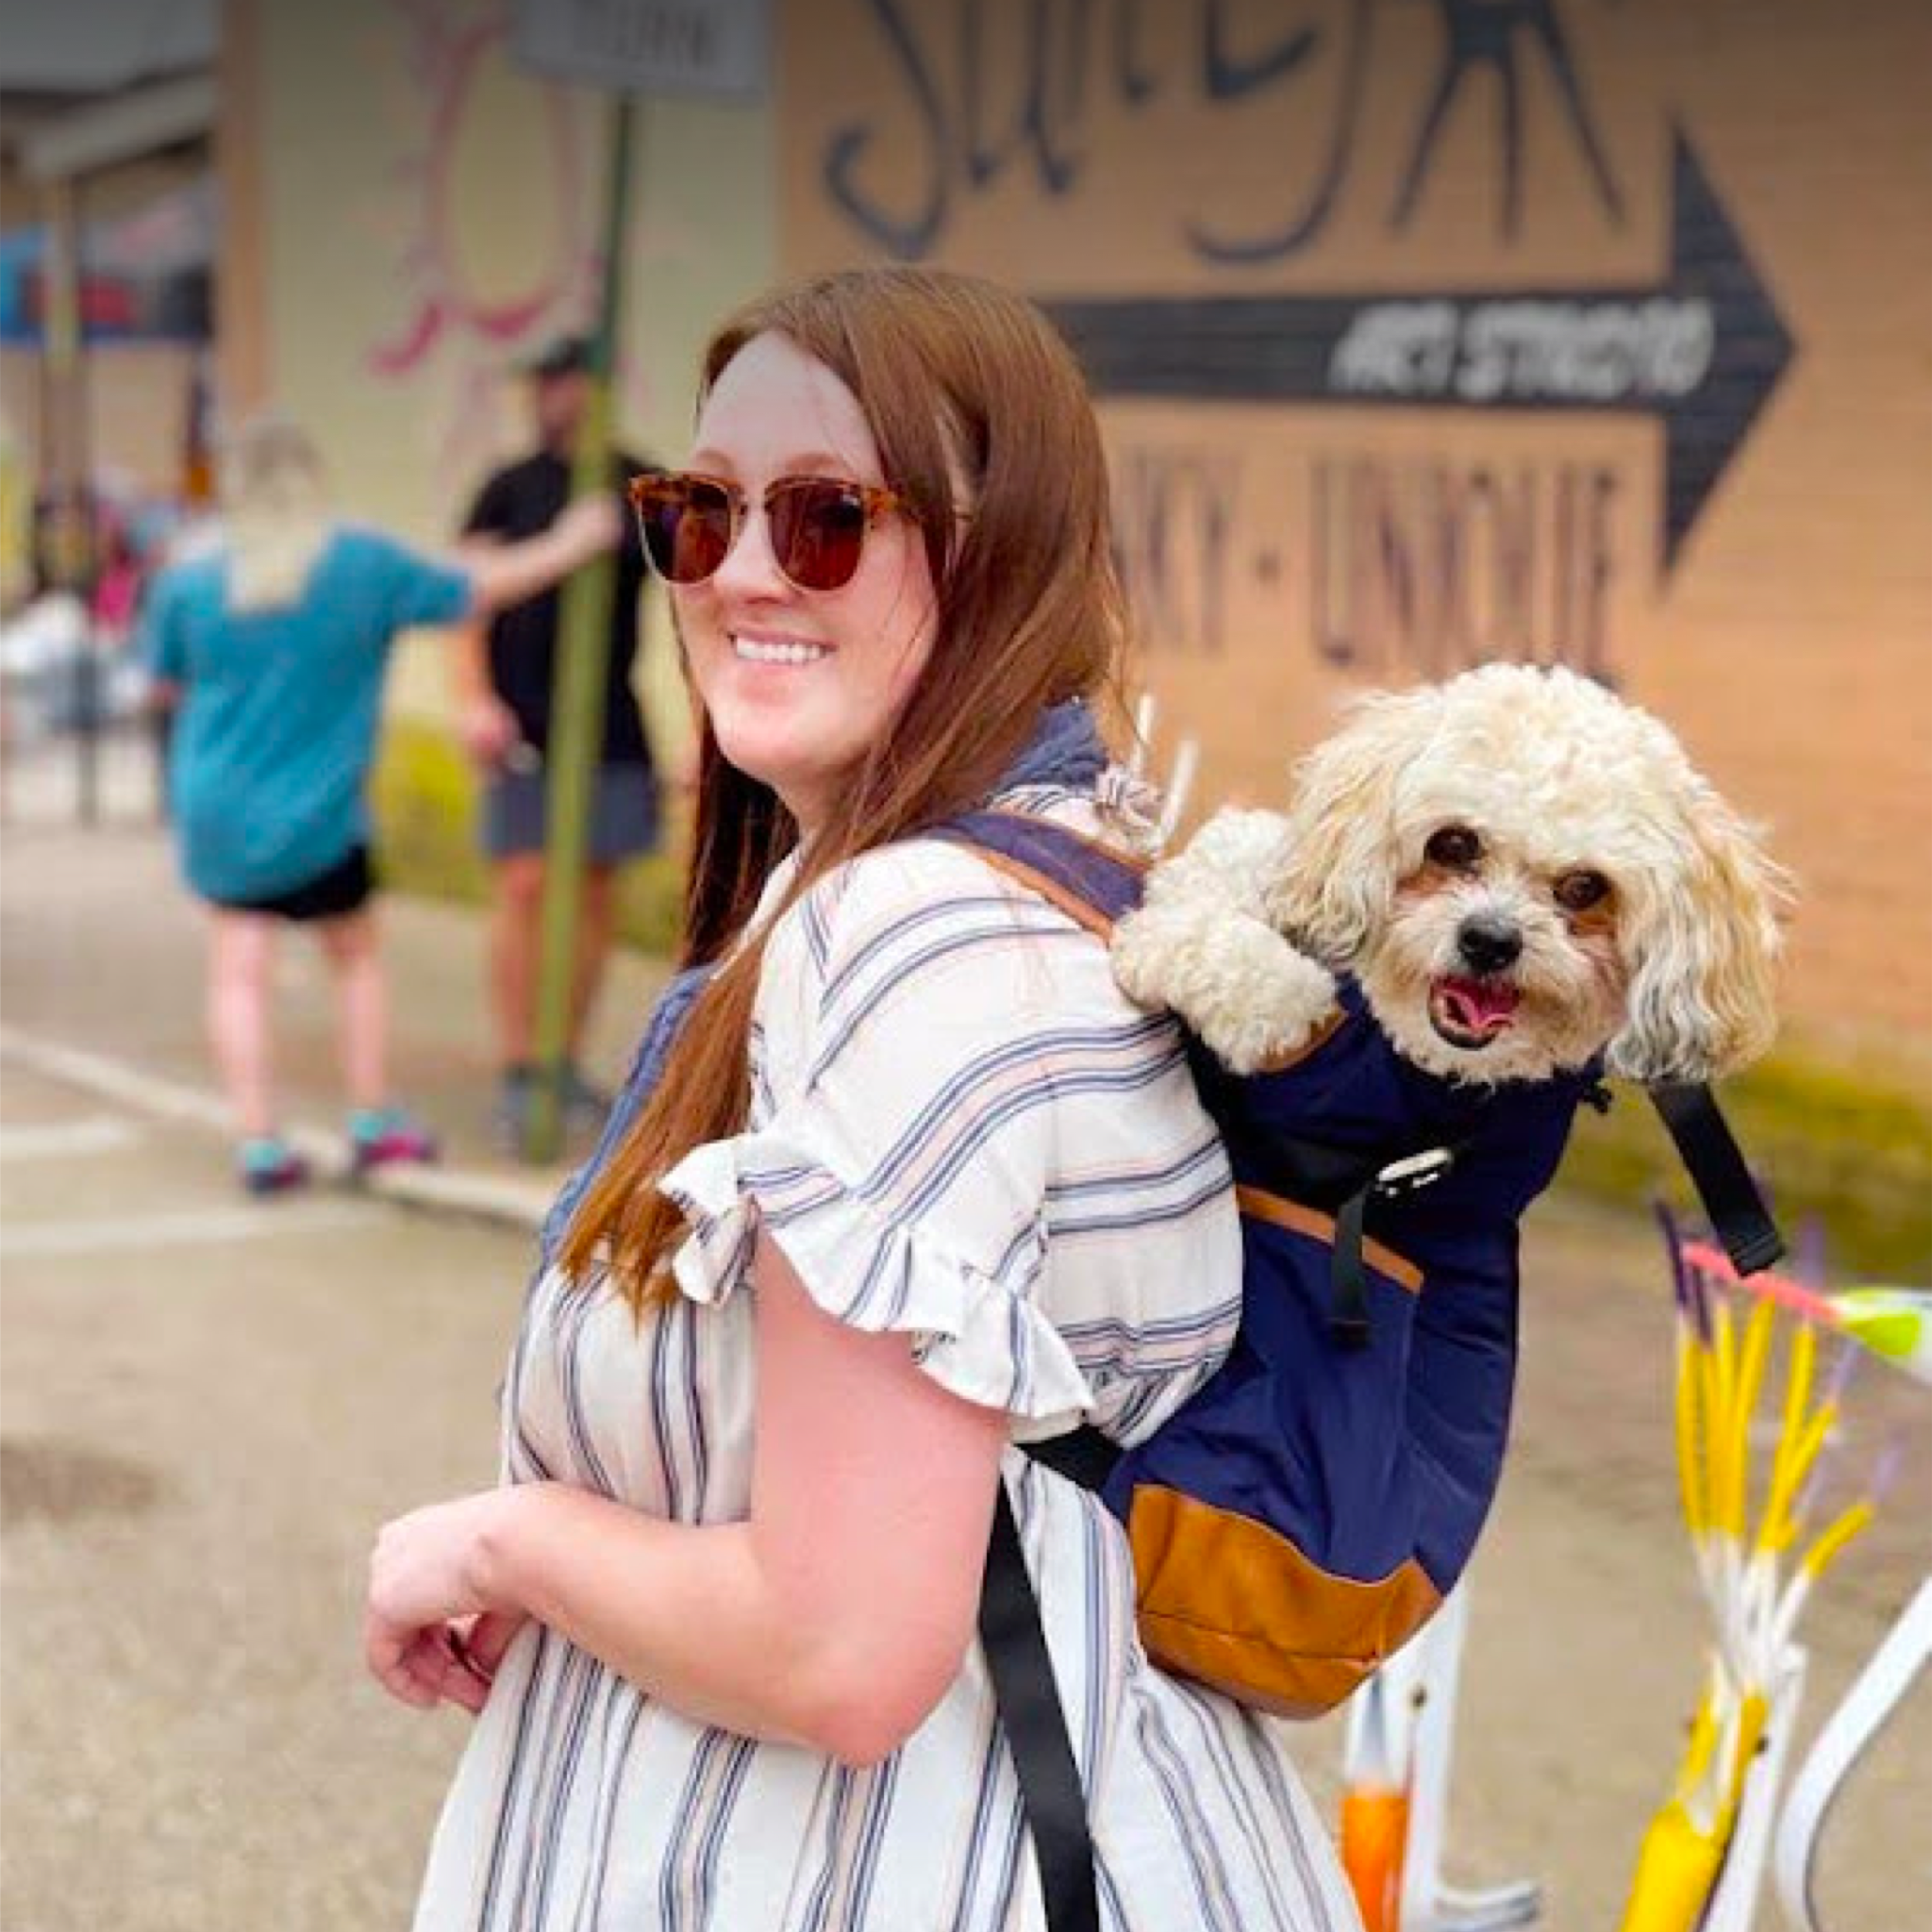 Teddy the pup rides on his dog mom's back through the flea market